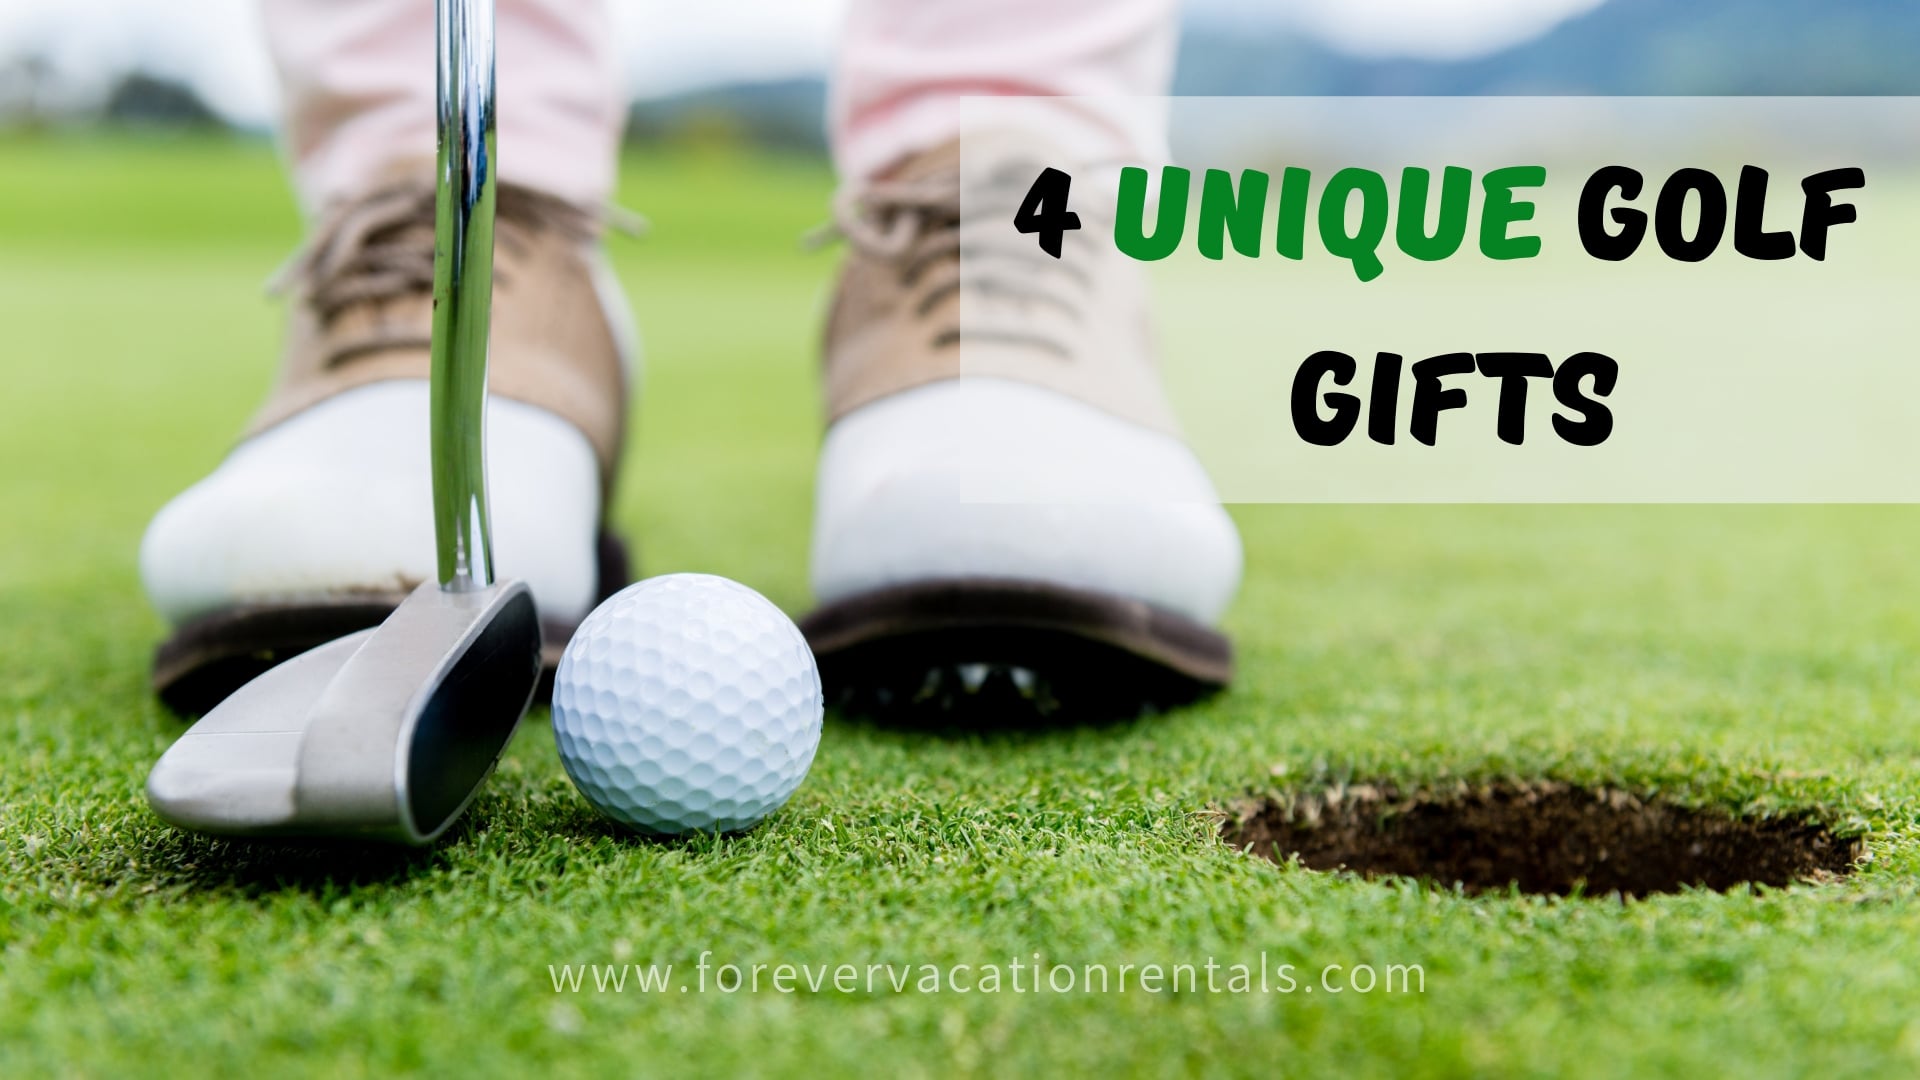 Forever Vacation Rentals - 4 Unique Golf Gifts To Give